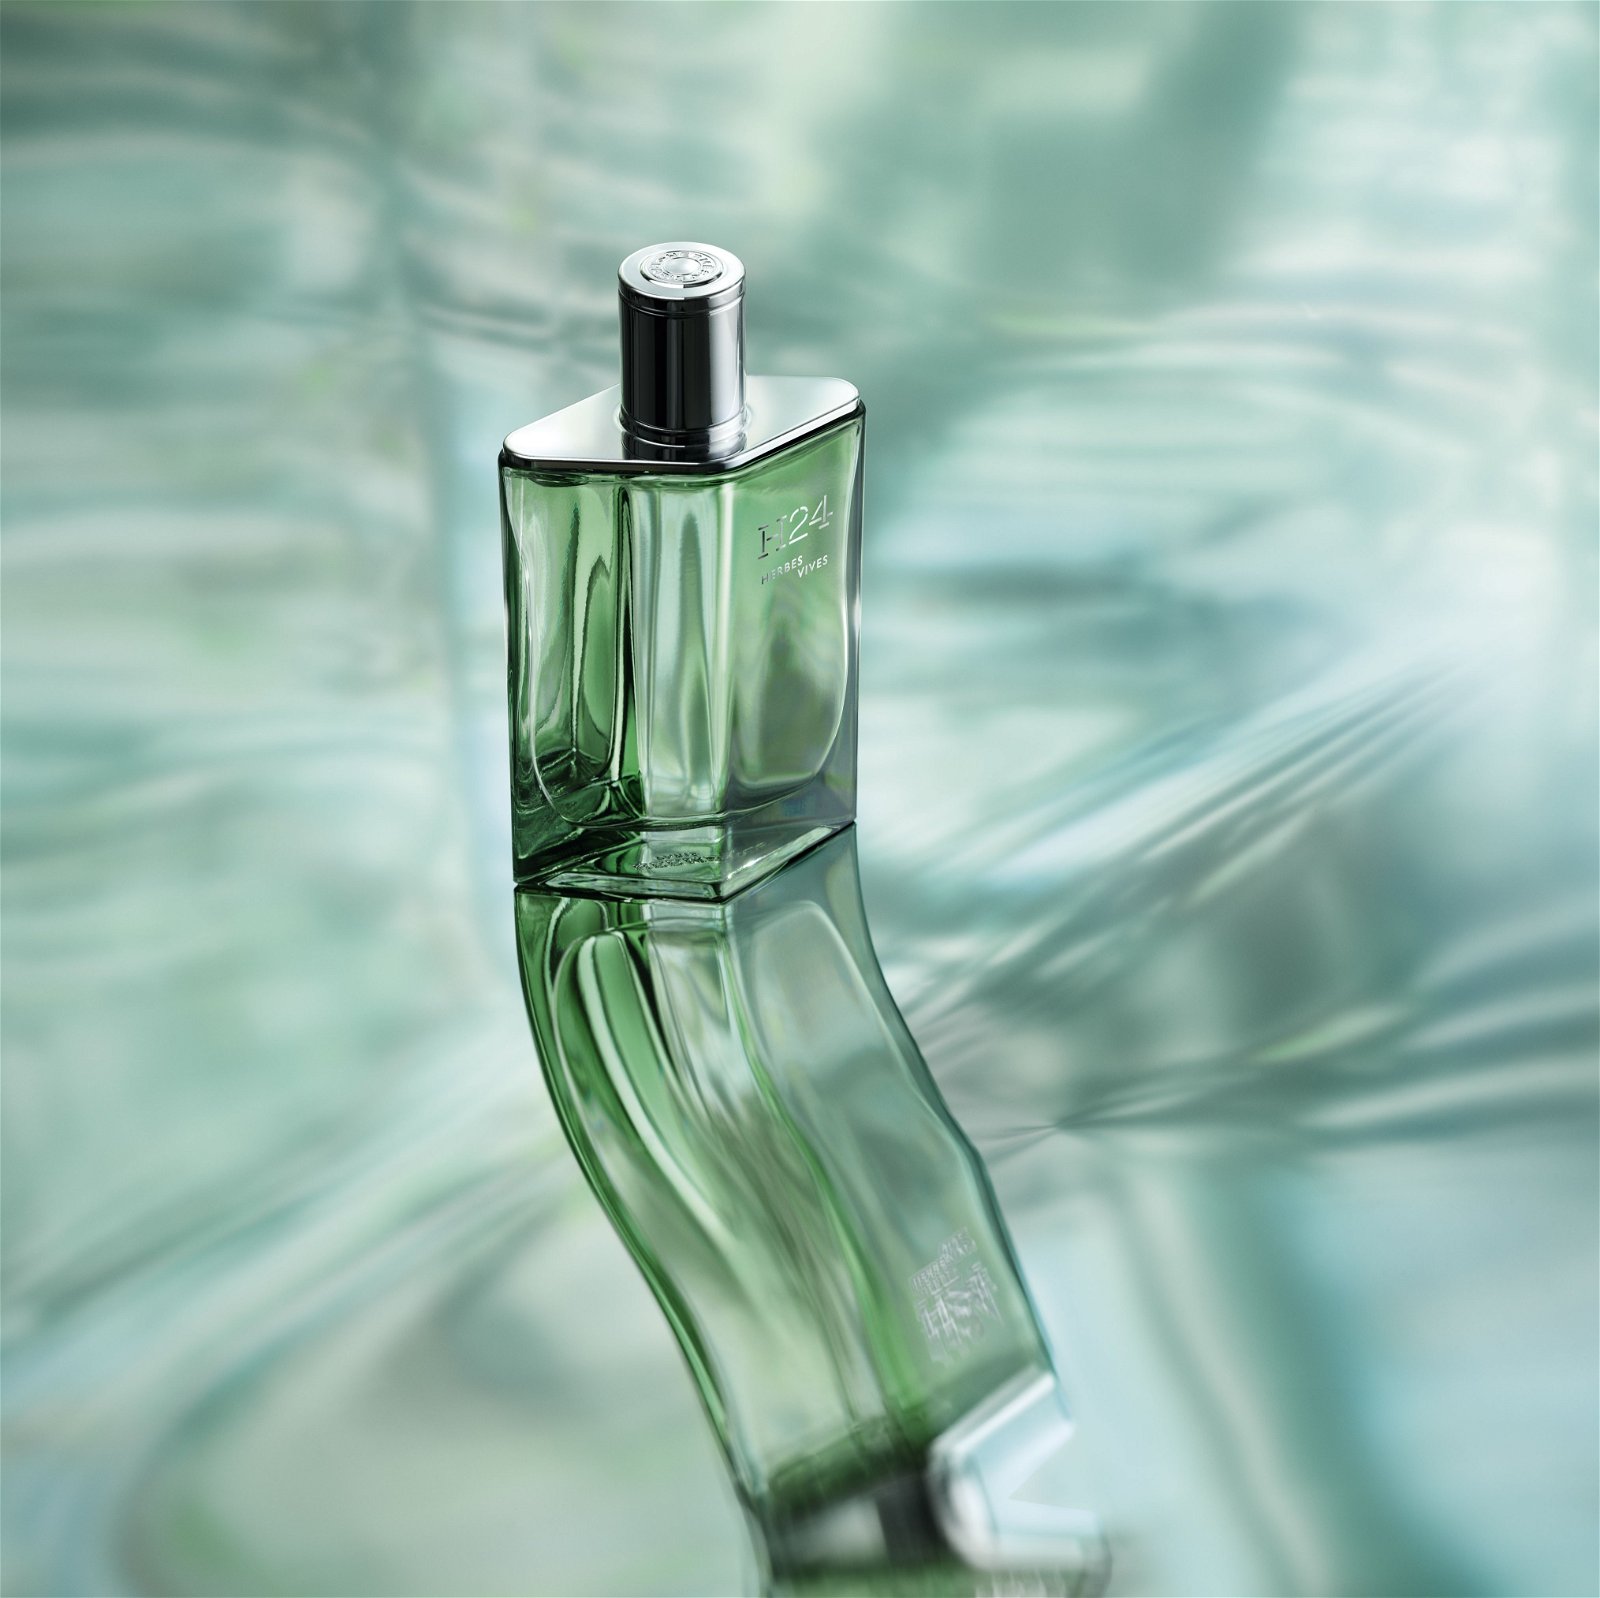 Hermès's New Fragrance Smells Like Spring—but Not Like You'd Expect